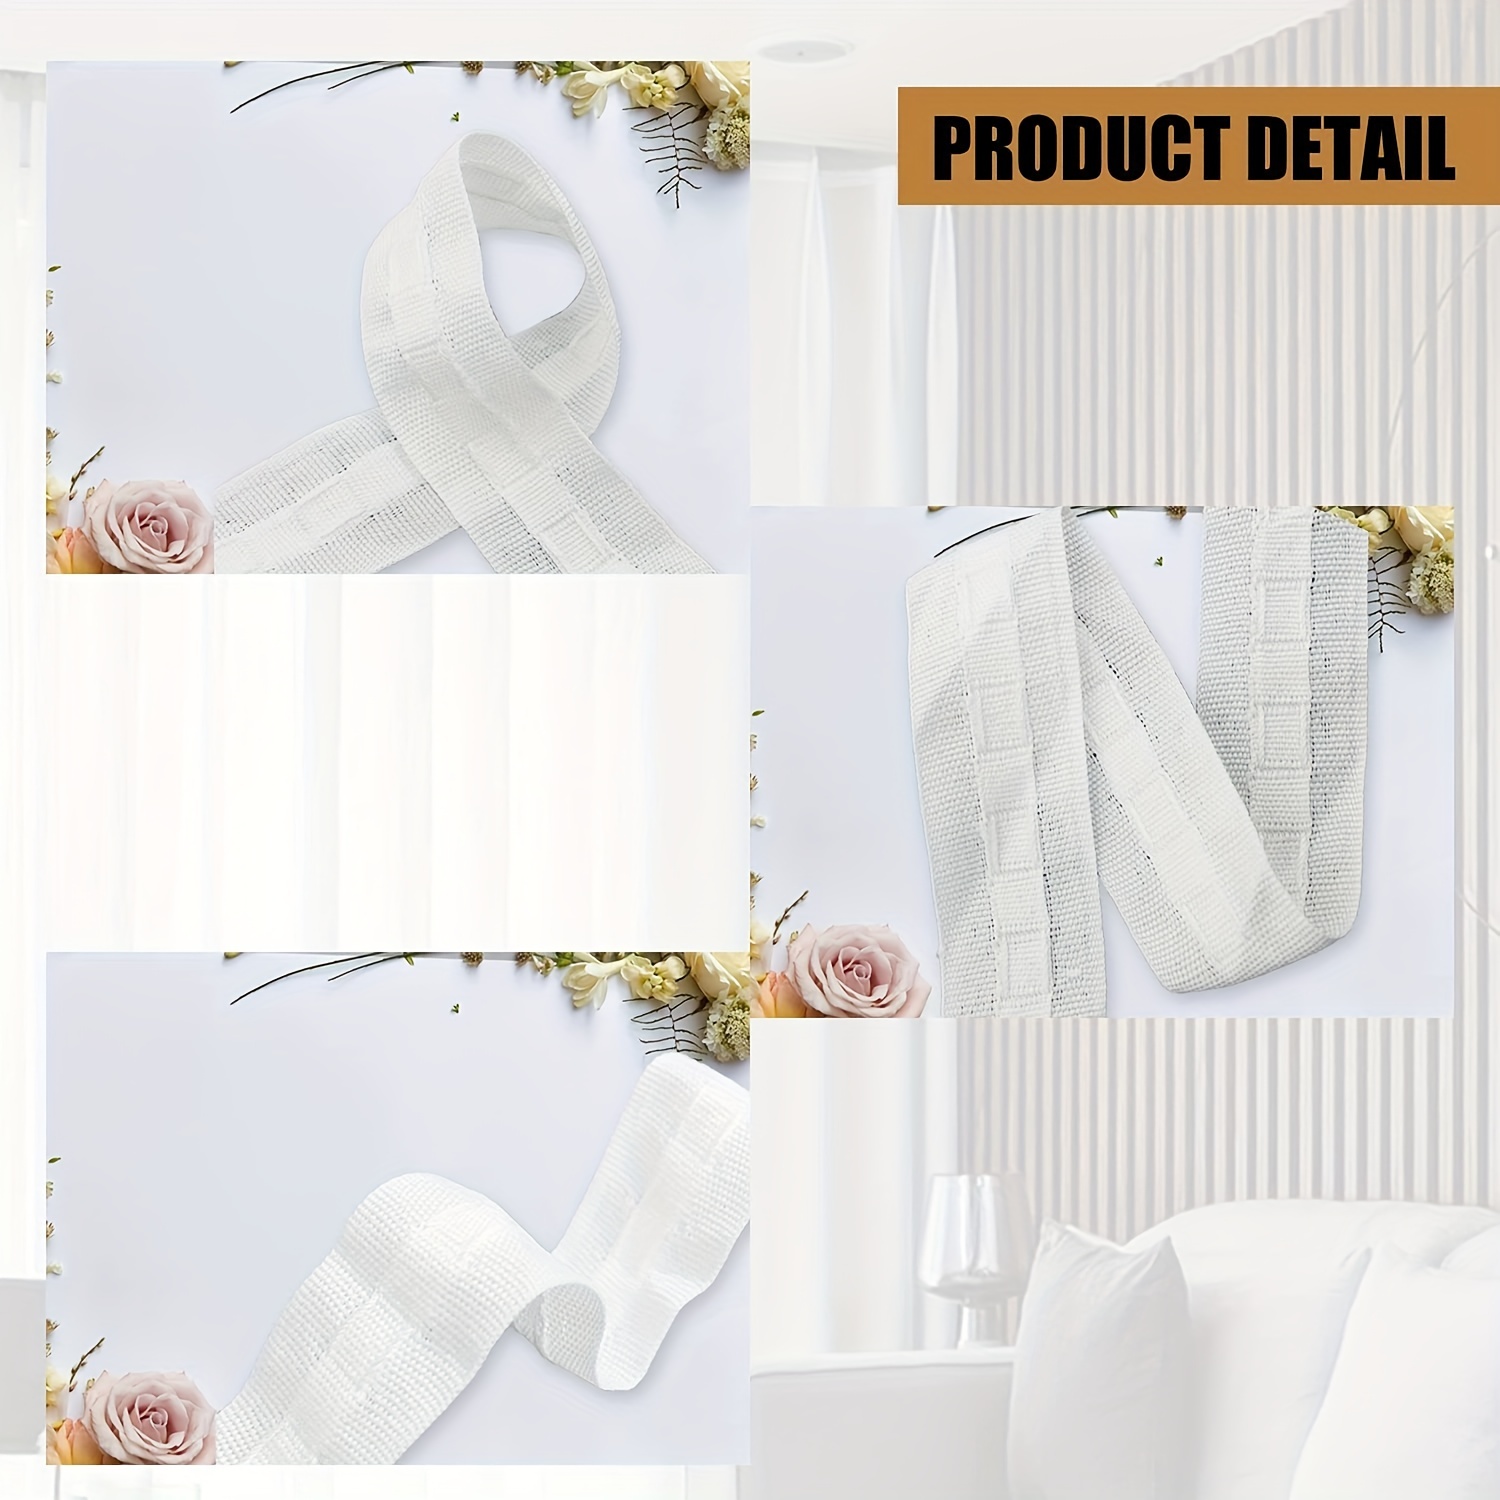 White American Type Pleated Curtains Tape